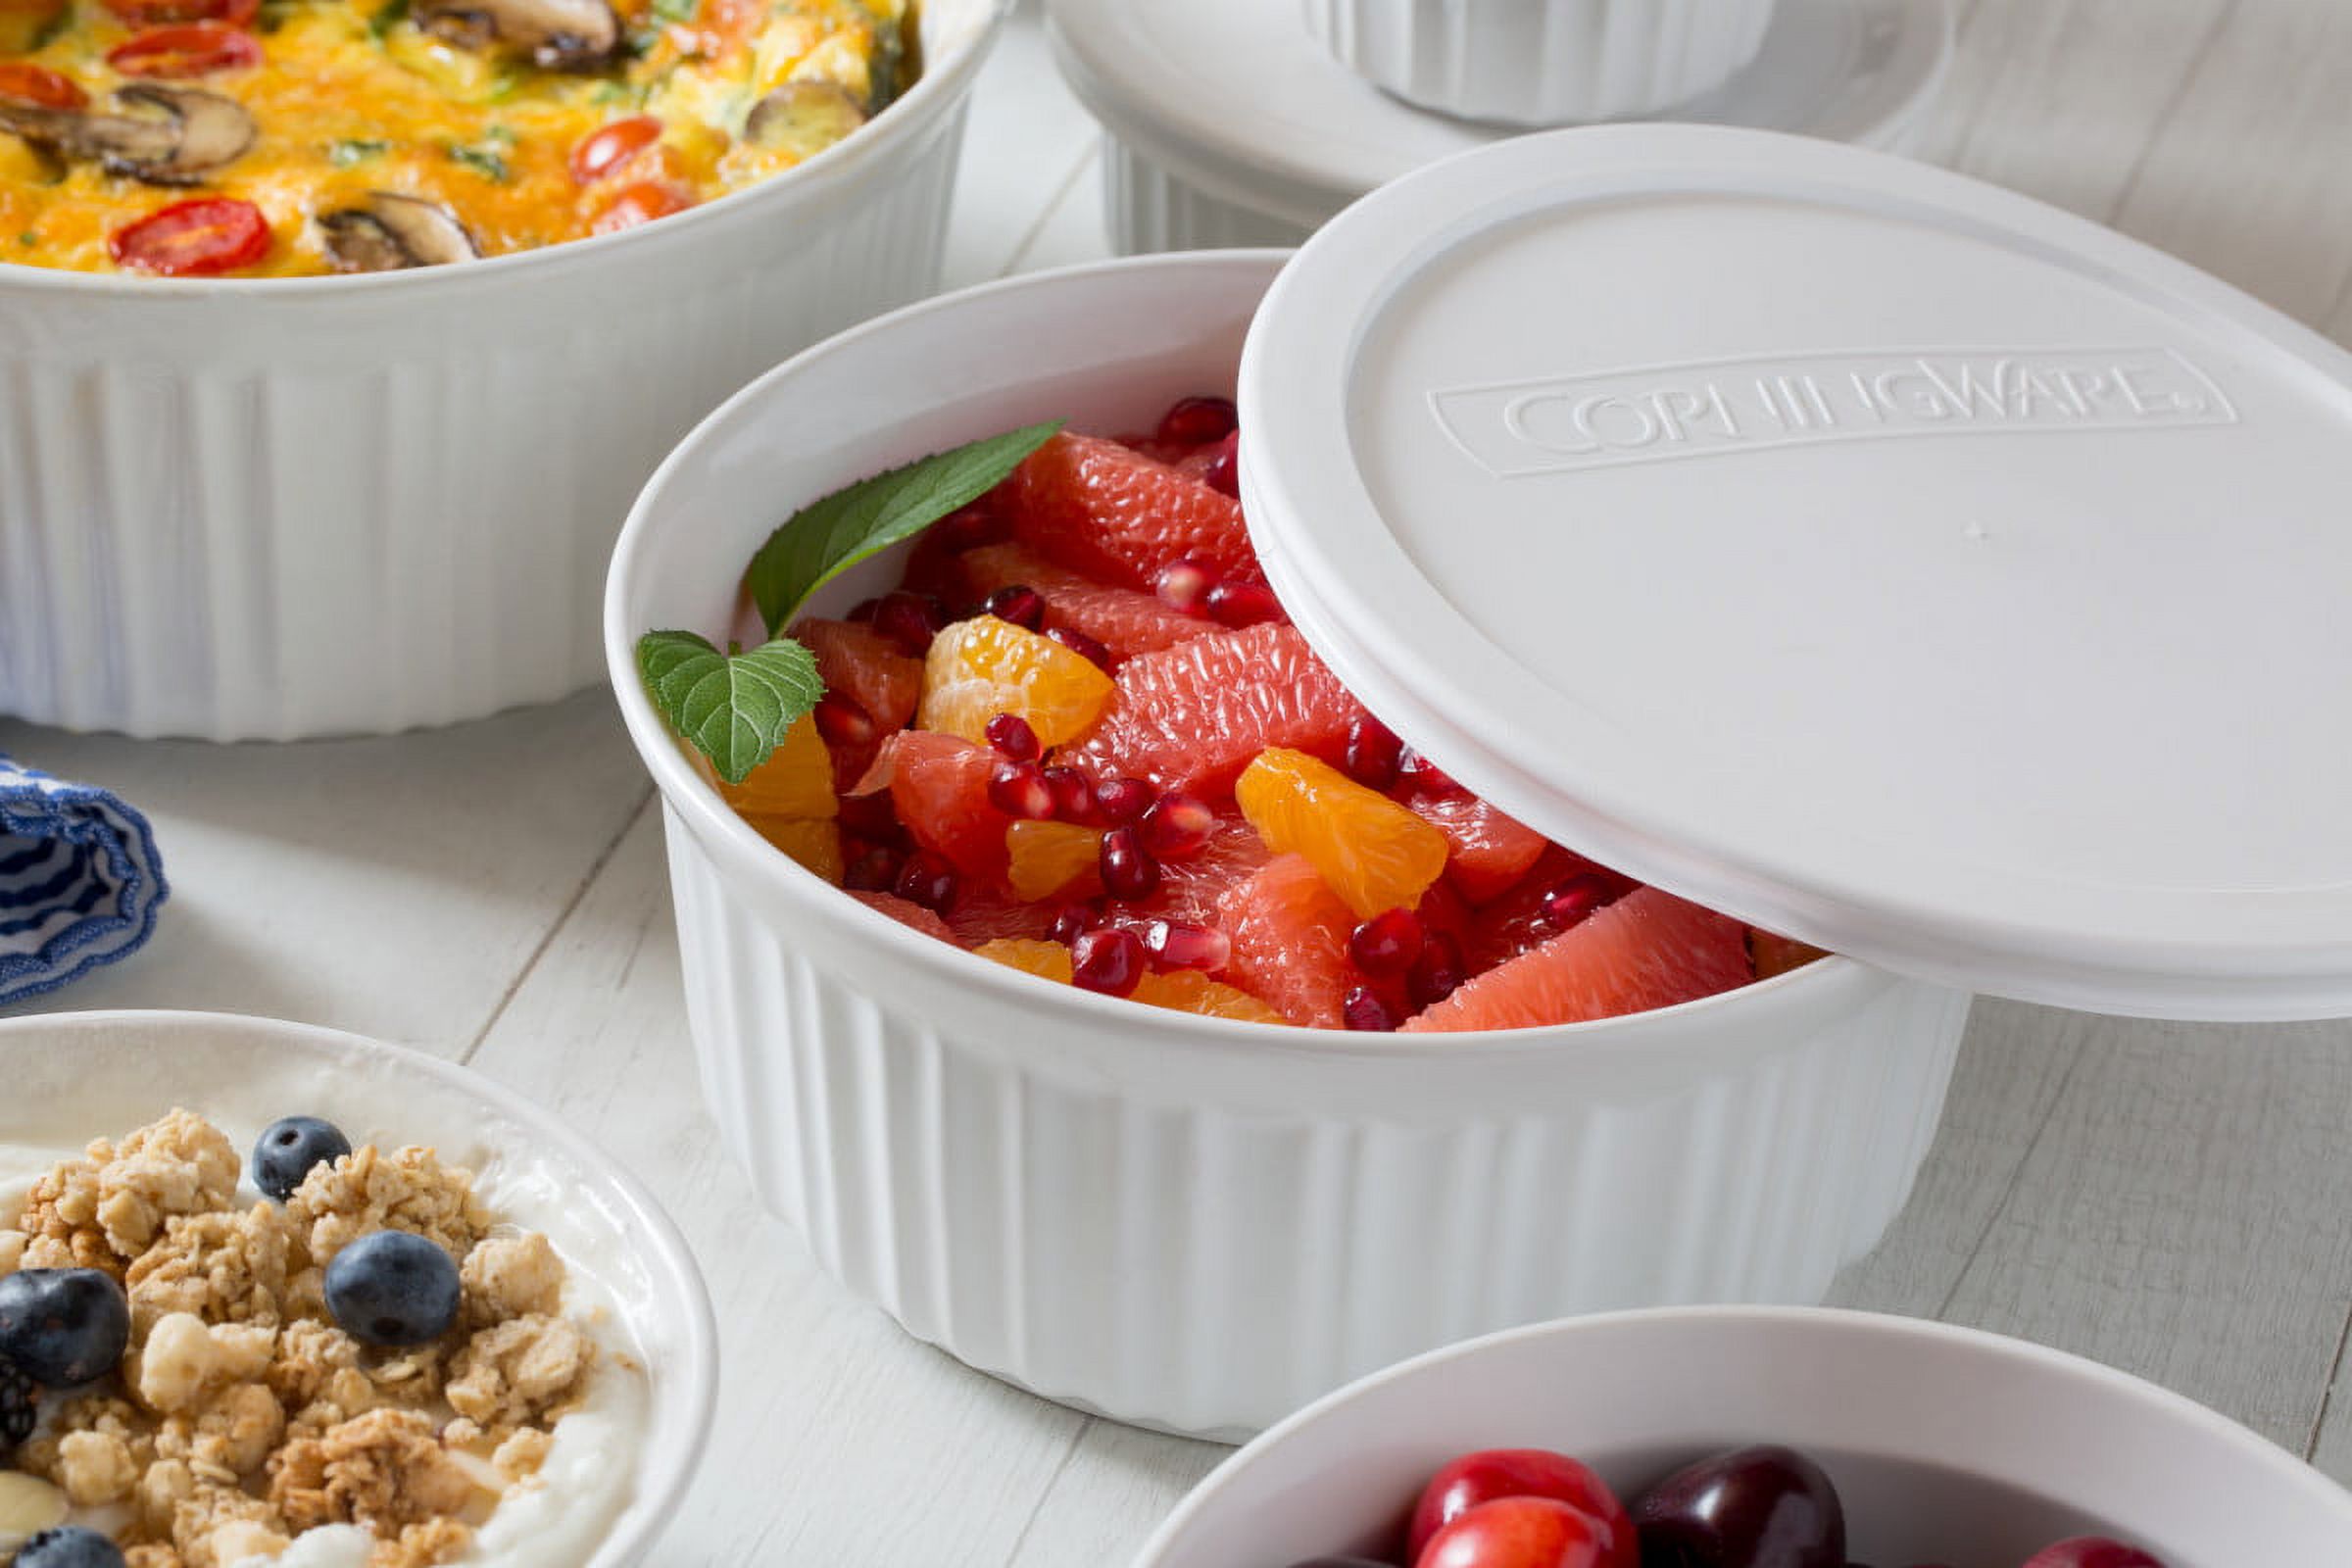 CorningWare French White 8-Piece Ceramic Stoneware Casserole Set with Glass and Plastic Lids, Round & Oval - image 3 of 6